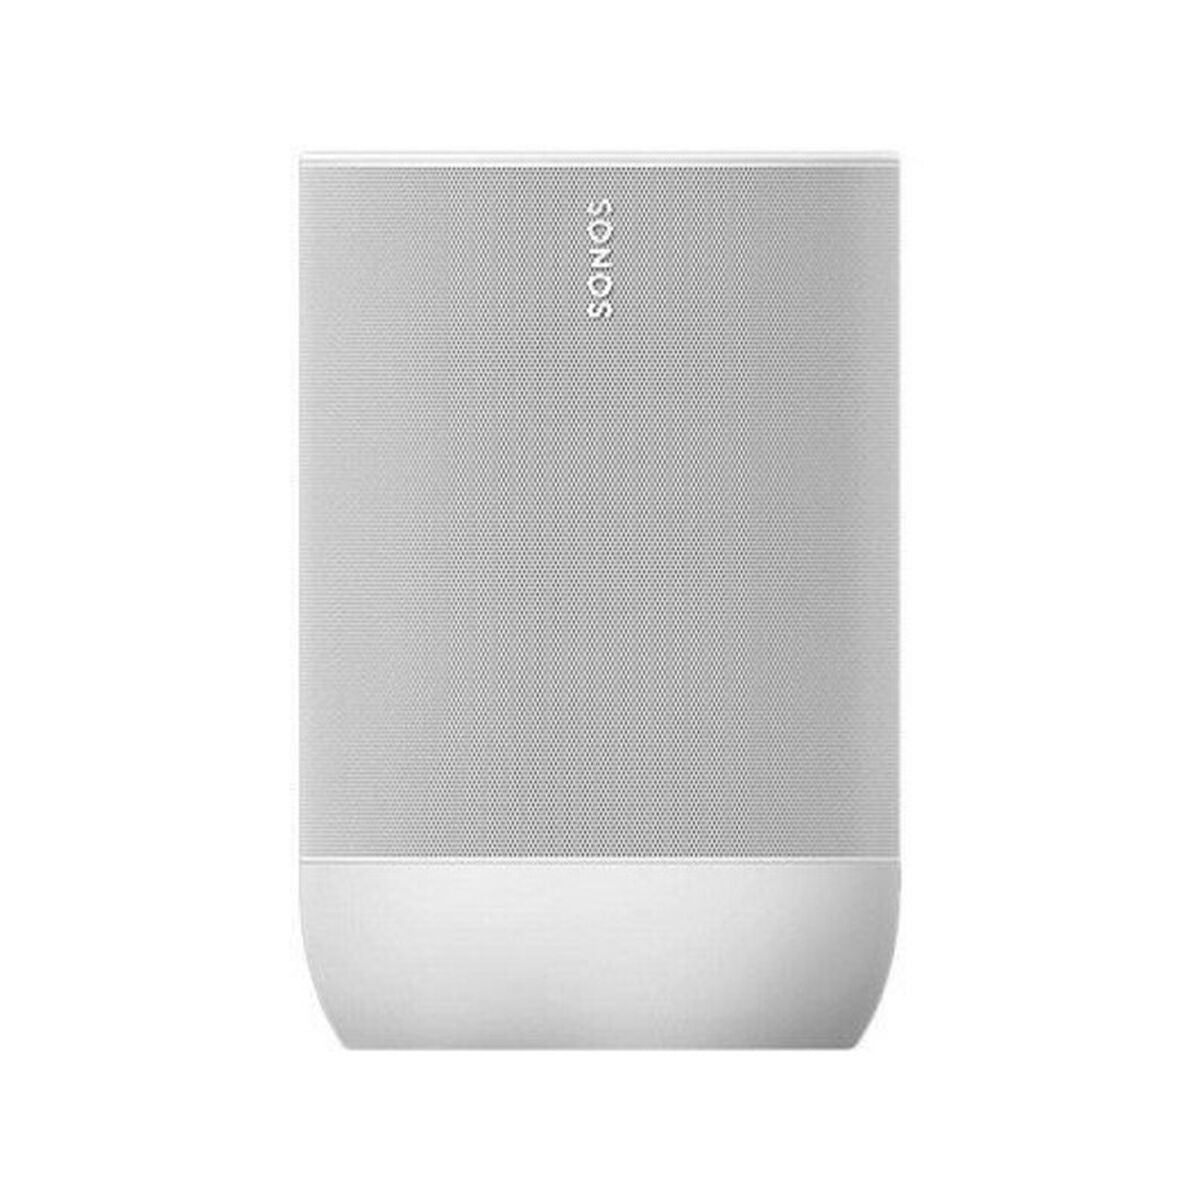 Wireless Bluetooth Speaker ALL IN ONE, Sonos, Electronics, Audio and Hi-Fi equipment, wireless-bluetooth-speaker-all-in-one-1, Brand_Sonos, category-reference-2609, category-reference-2637, category-reference-2882, category-reference-t-19653, category-reference-t-7441, category-reference-t-7442, cinema and television, Colour_Black, Colour_White, Condition_NEW, entertainment, music, Price_400 - 500, Teleworking, RiotNook